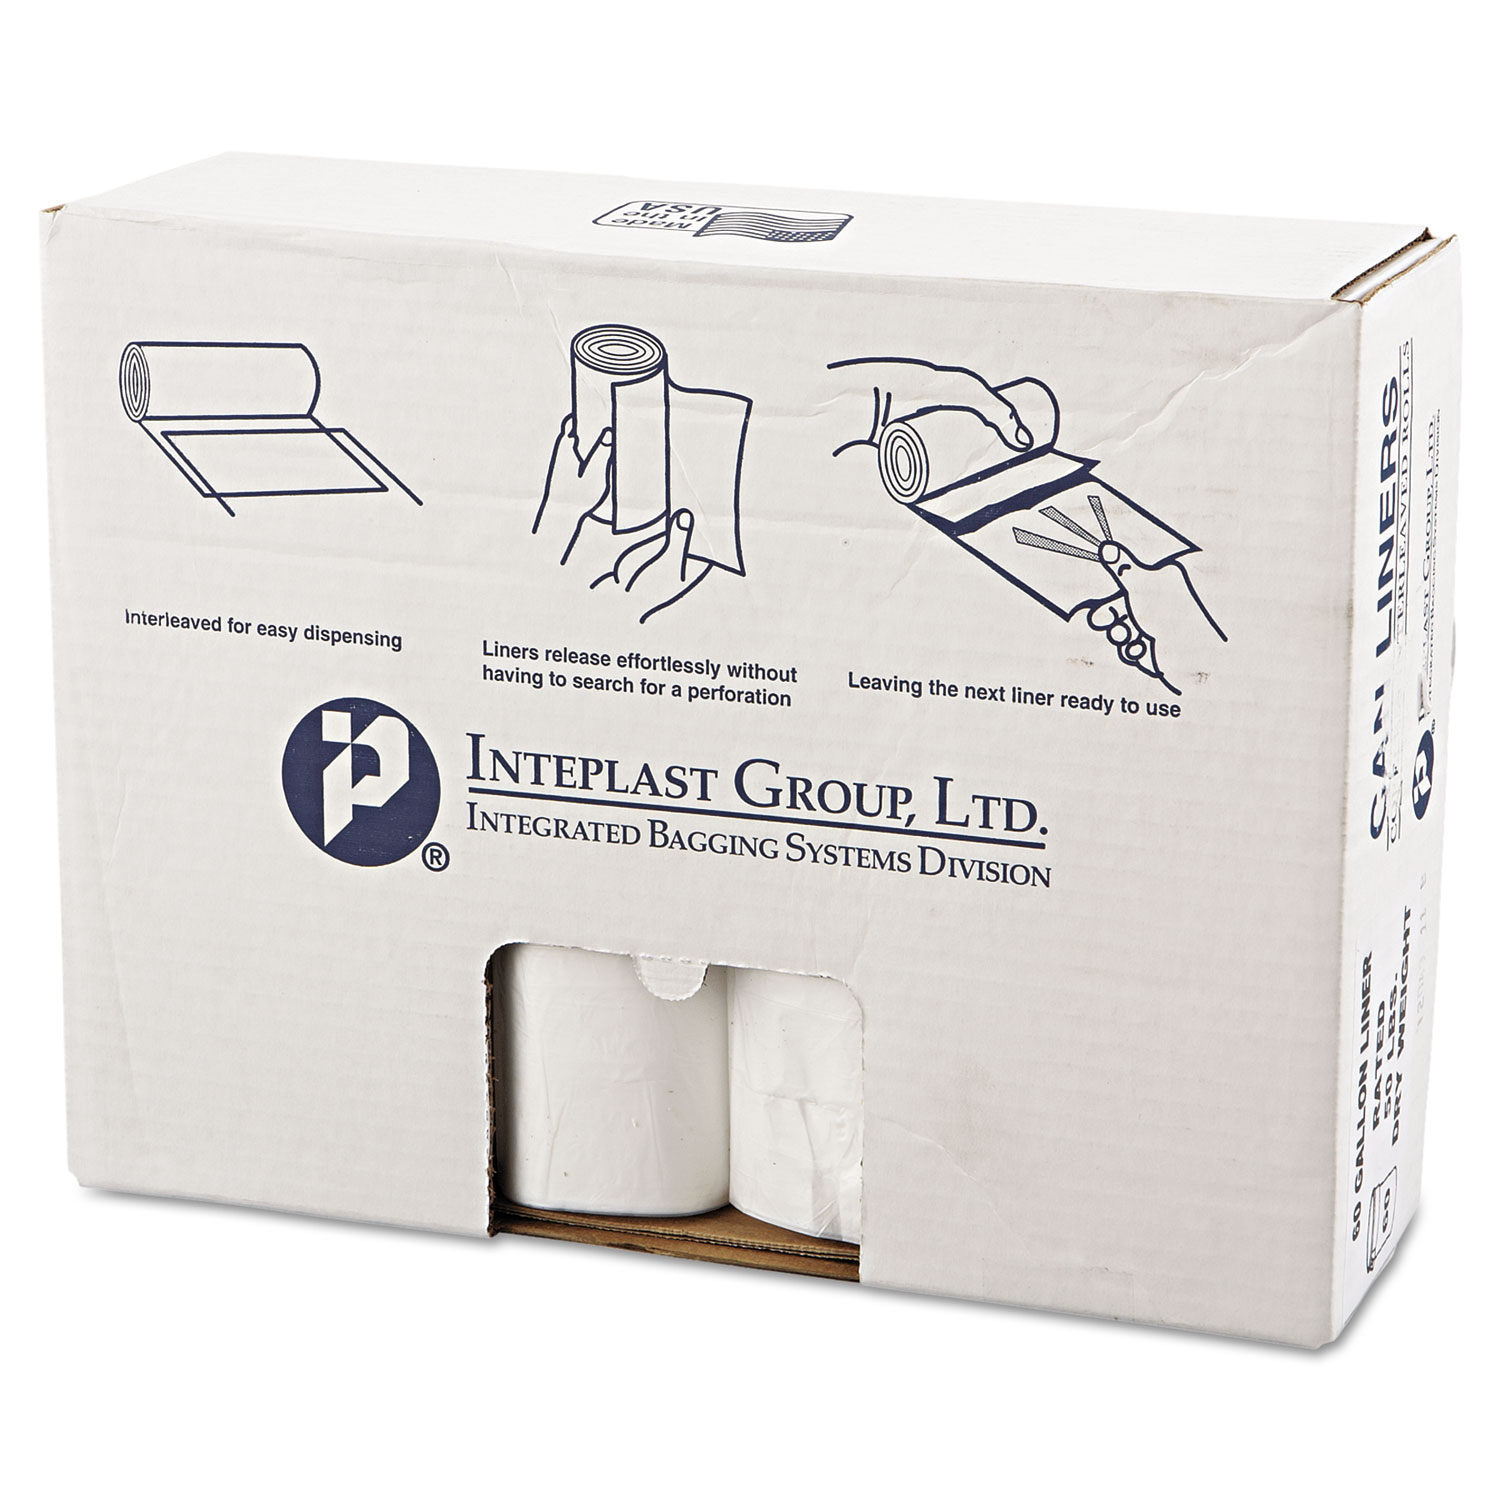  Inteplast Group VALH3860N14 High-Density Commercial Can Liners Value Pack, 60 gal, 12 microns, 38 x 58, Clear, 200/Carton (IBSVALH3860N14) 